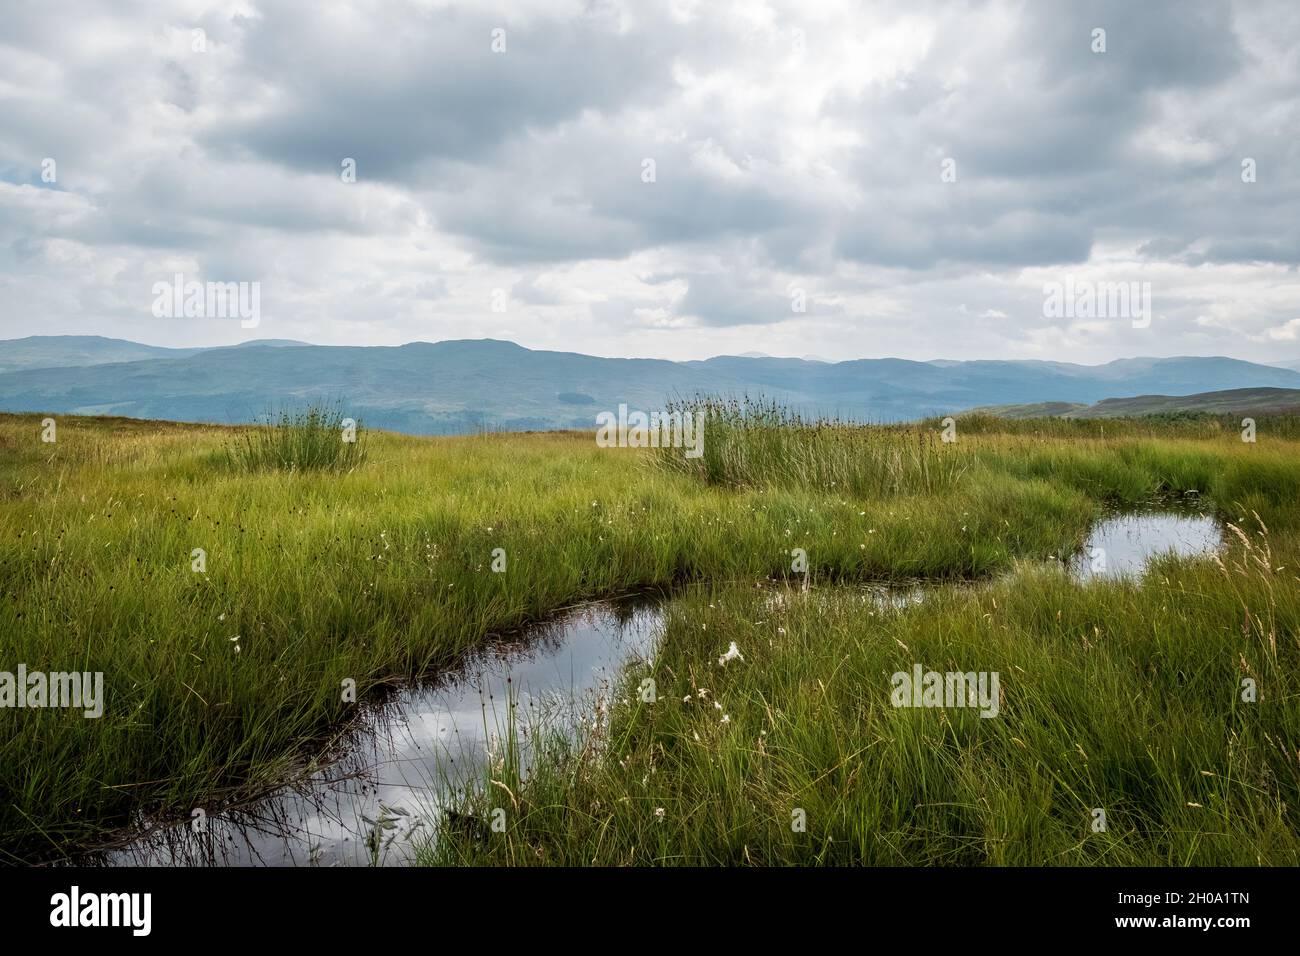 Stagnant water and grass - peat bogs in to the landscape north of Loch Tay in Perthshire, Scotland Stock Photo